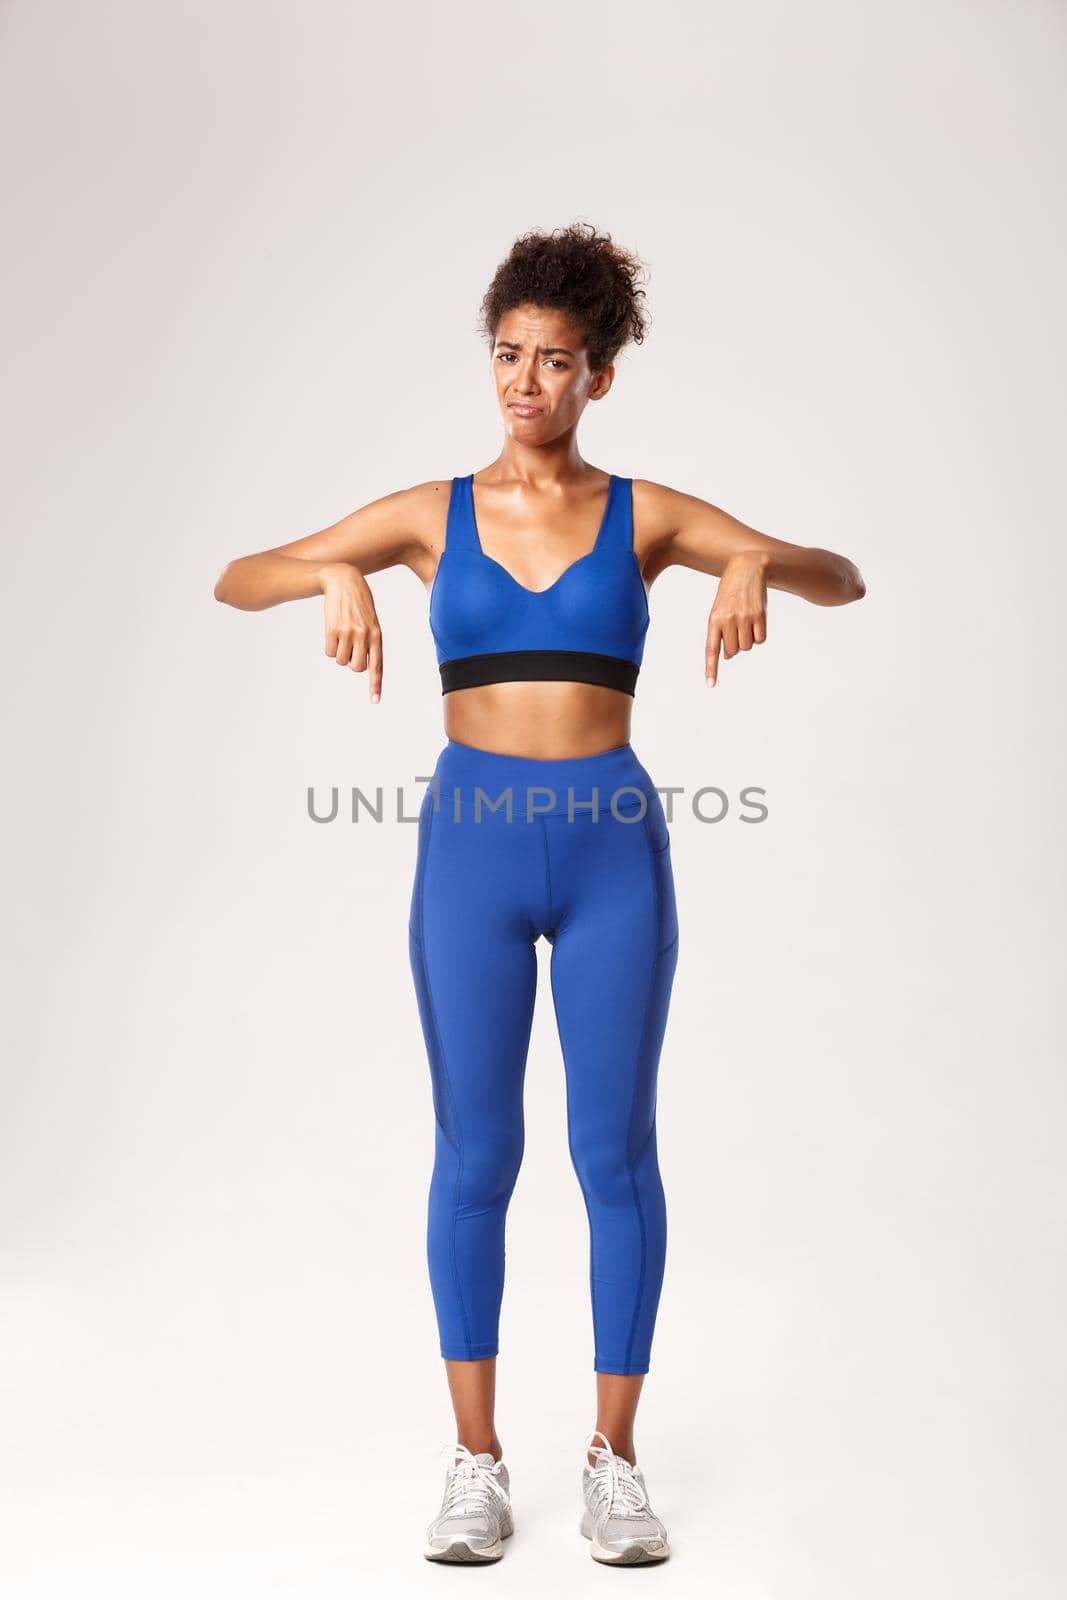 Full length of disappointed african-american girl in blue sports outfit, pointing fingers down and grimacing, complaining about something bad, standing over white background.